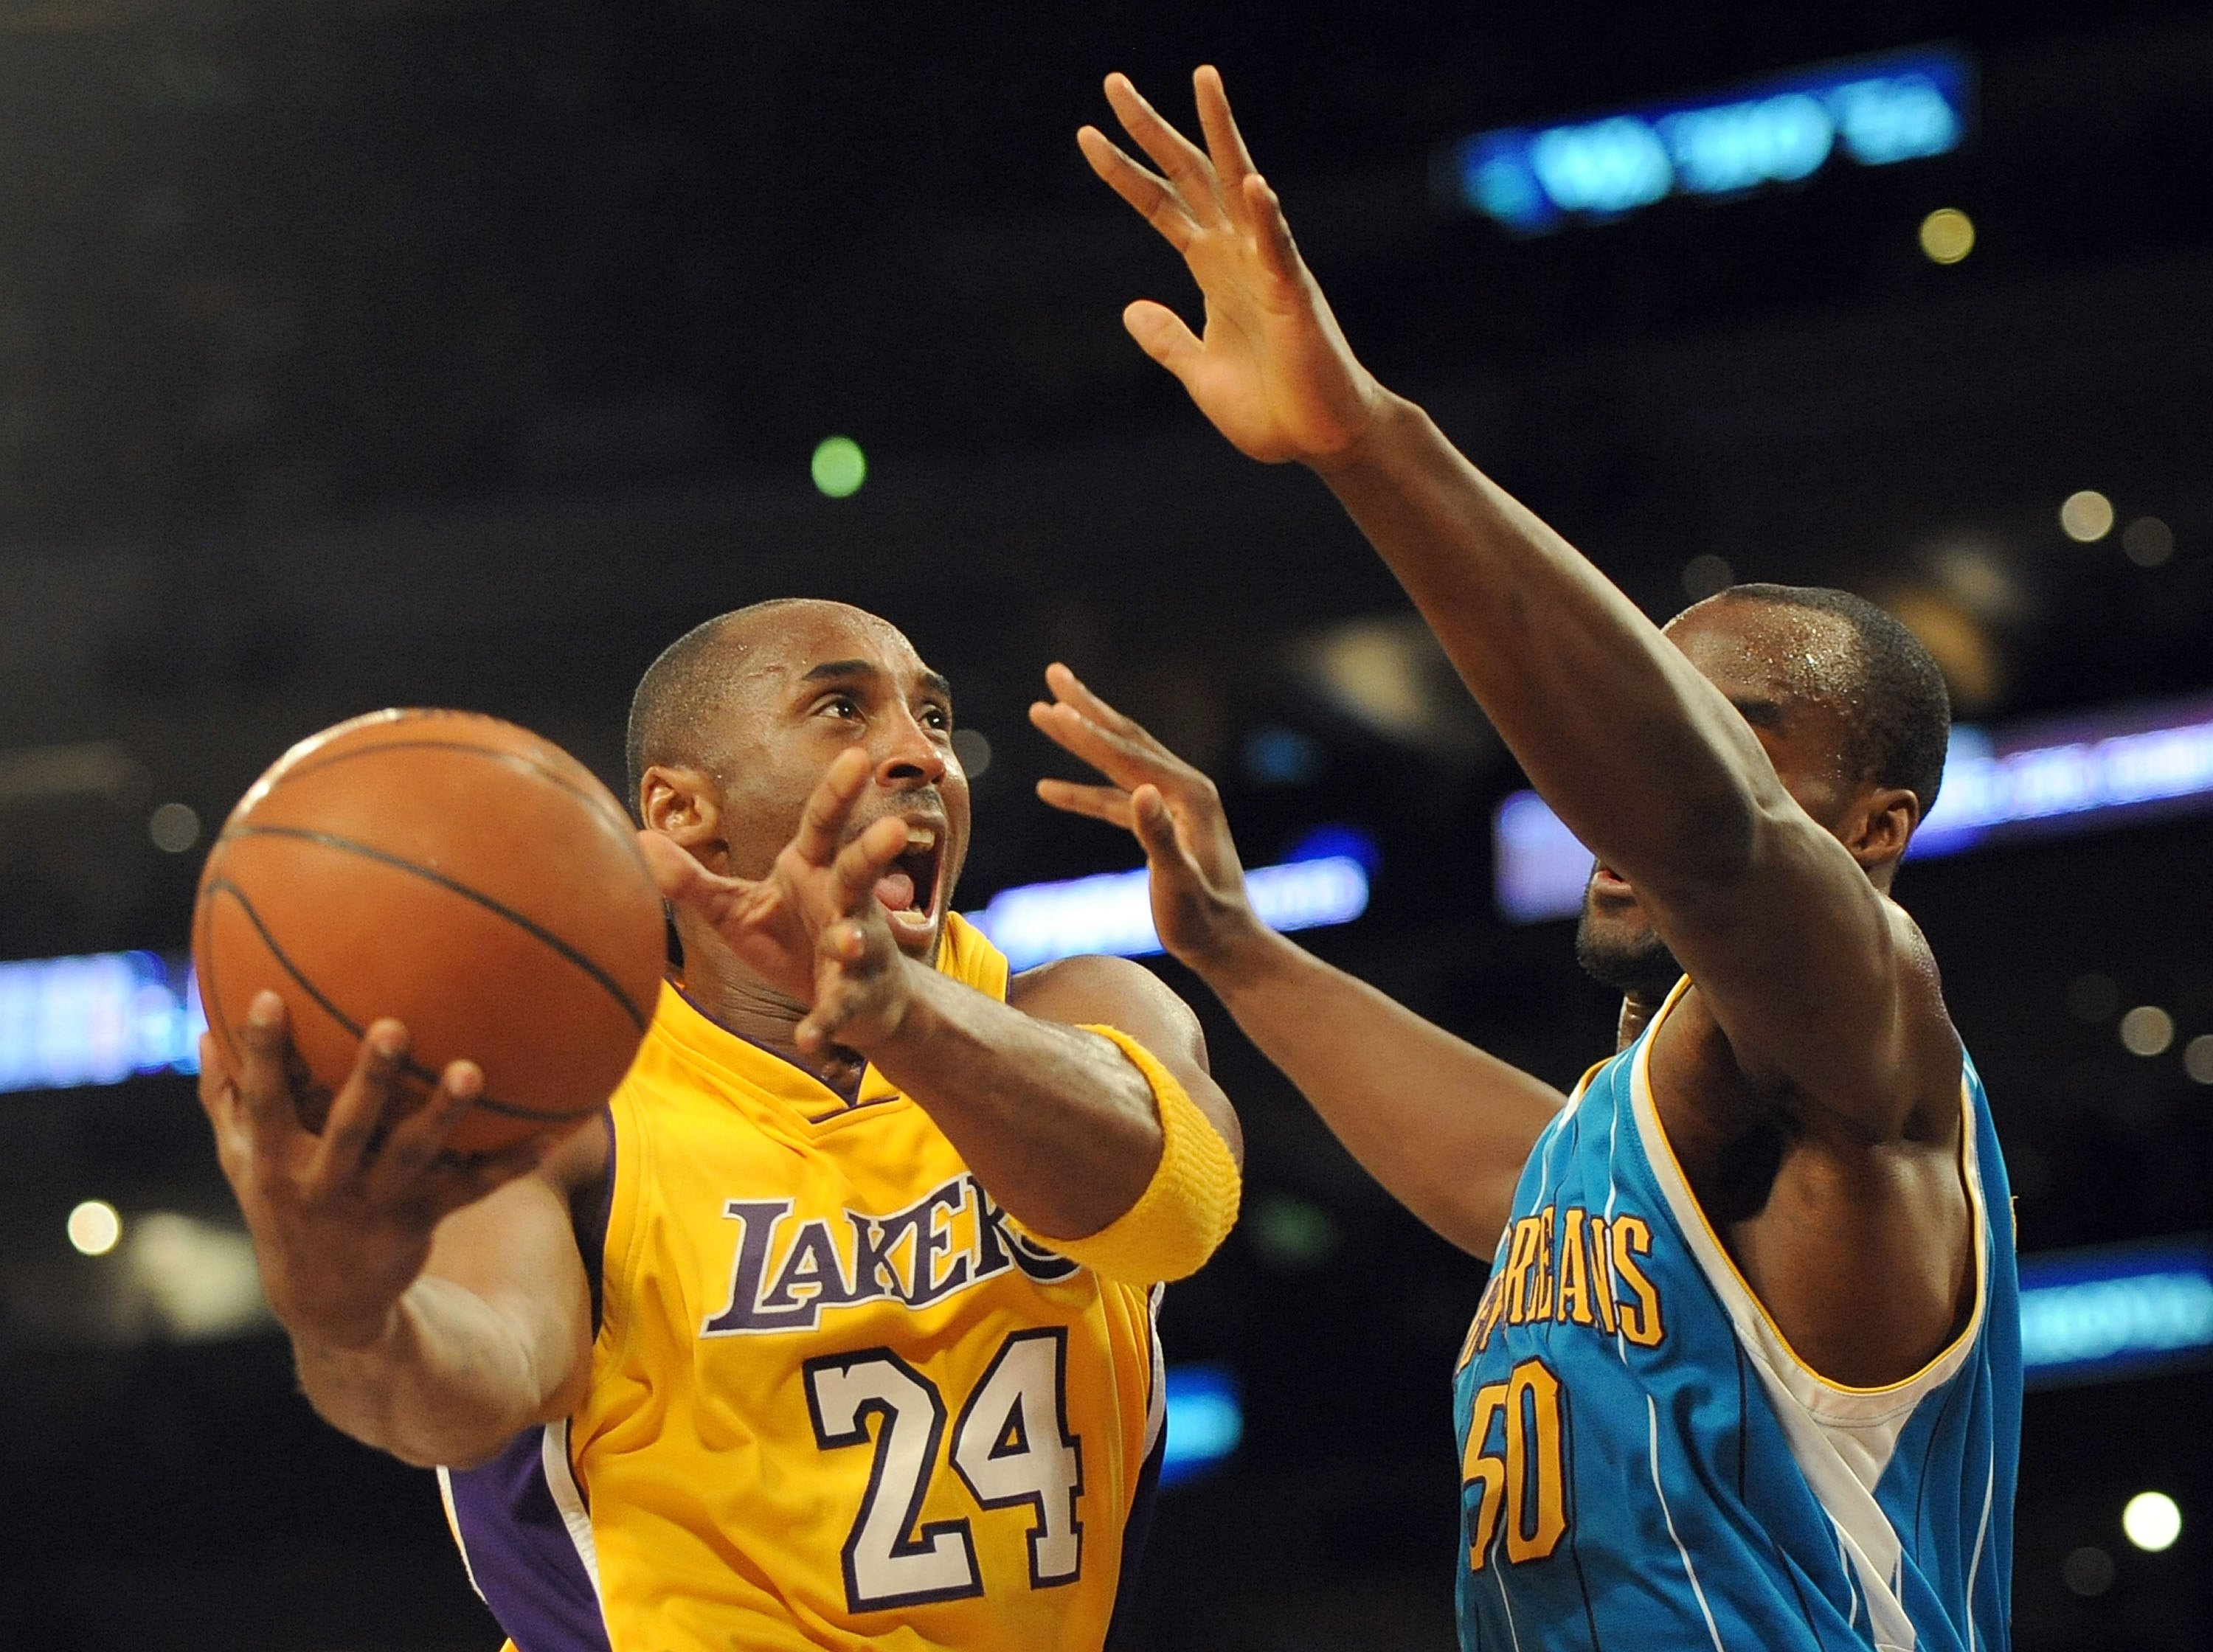 LOS ANGELES, CA - DECEMBER 01:  Kobe Bryant #24 of the Los Angeles Lakers goes in for a layup around Emeka Okafor #50 of the New Orleans Hornets during the first half at Staples Center on December 1, 2009 in Los Angeles, California.  (Photo by Harry How/G